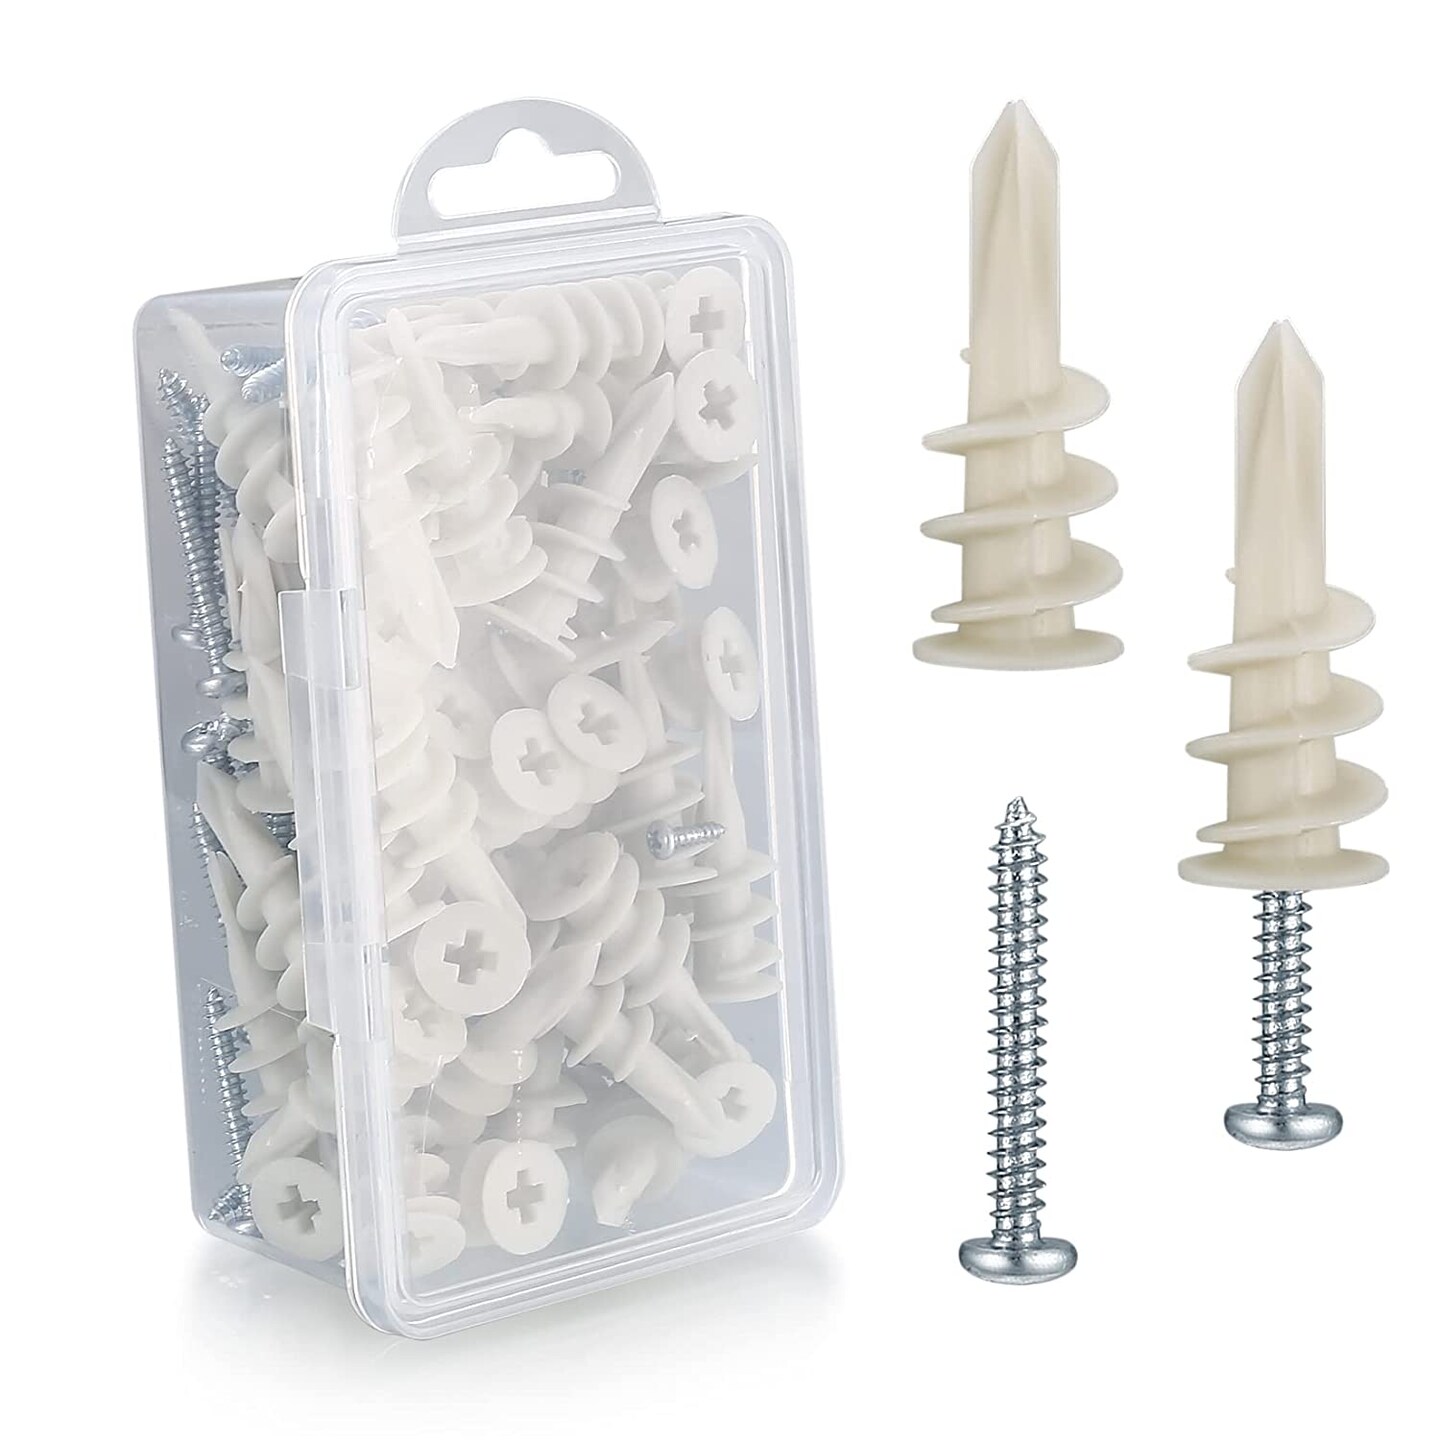 Kitcheniva 104 Pcs Wall Anchors and Screws for Drywall